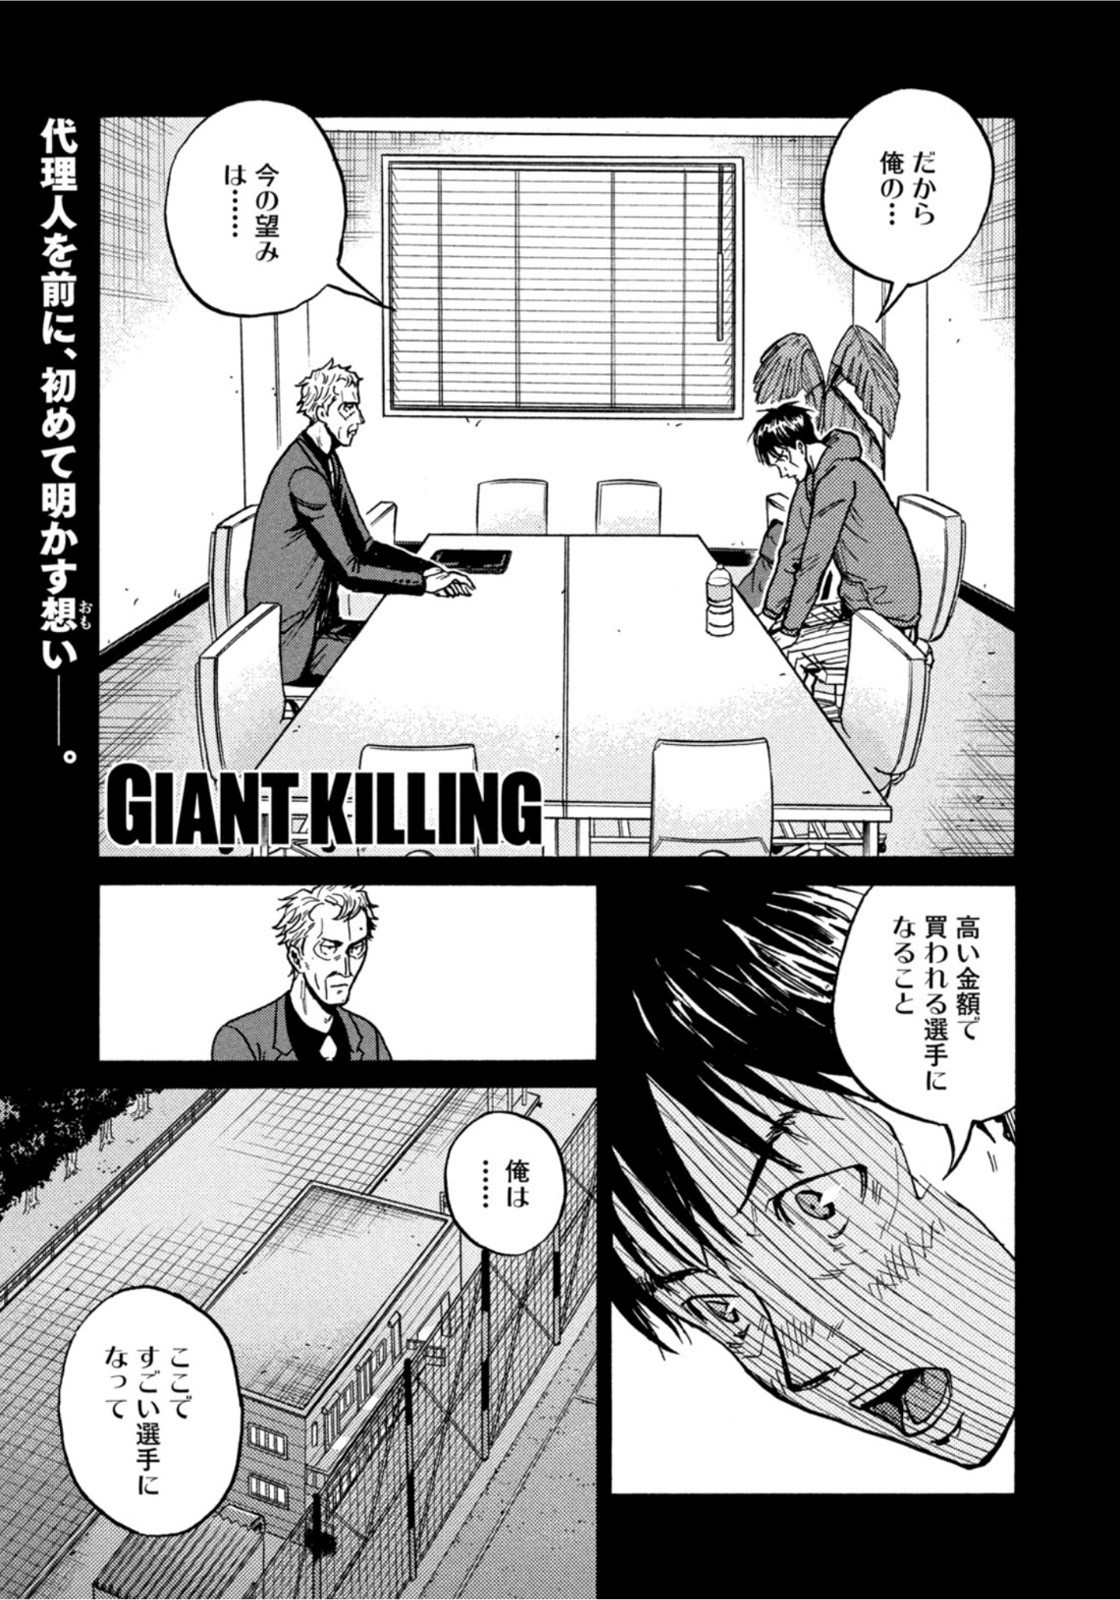 Giant Killing - Chapter 598 - Page 1